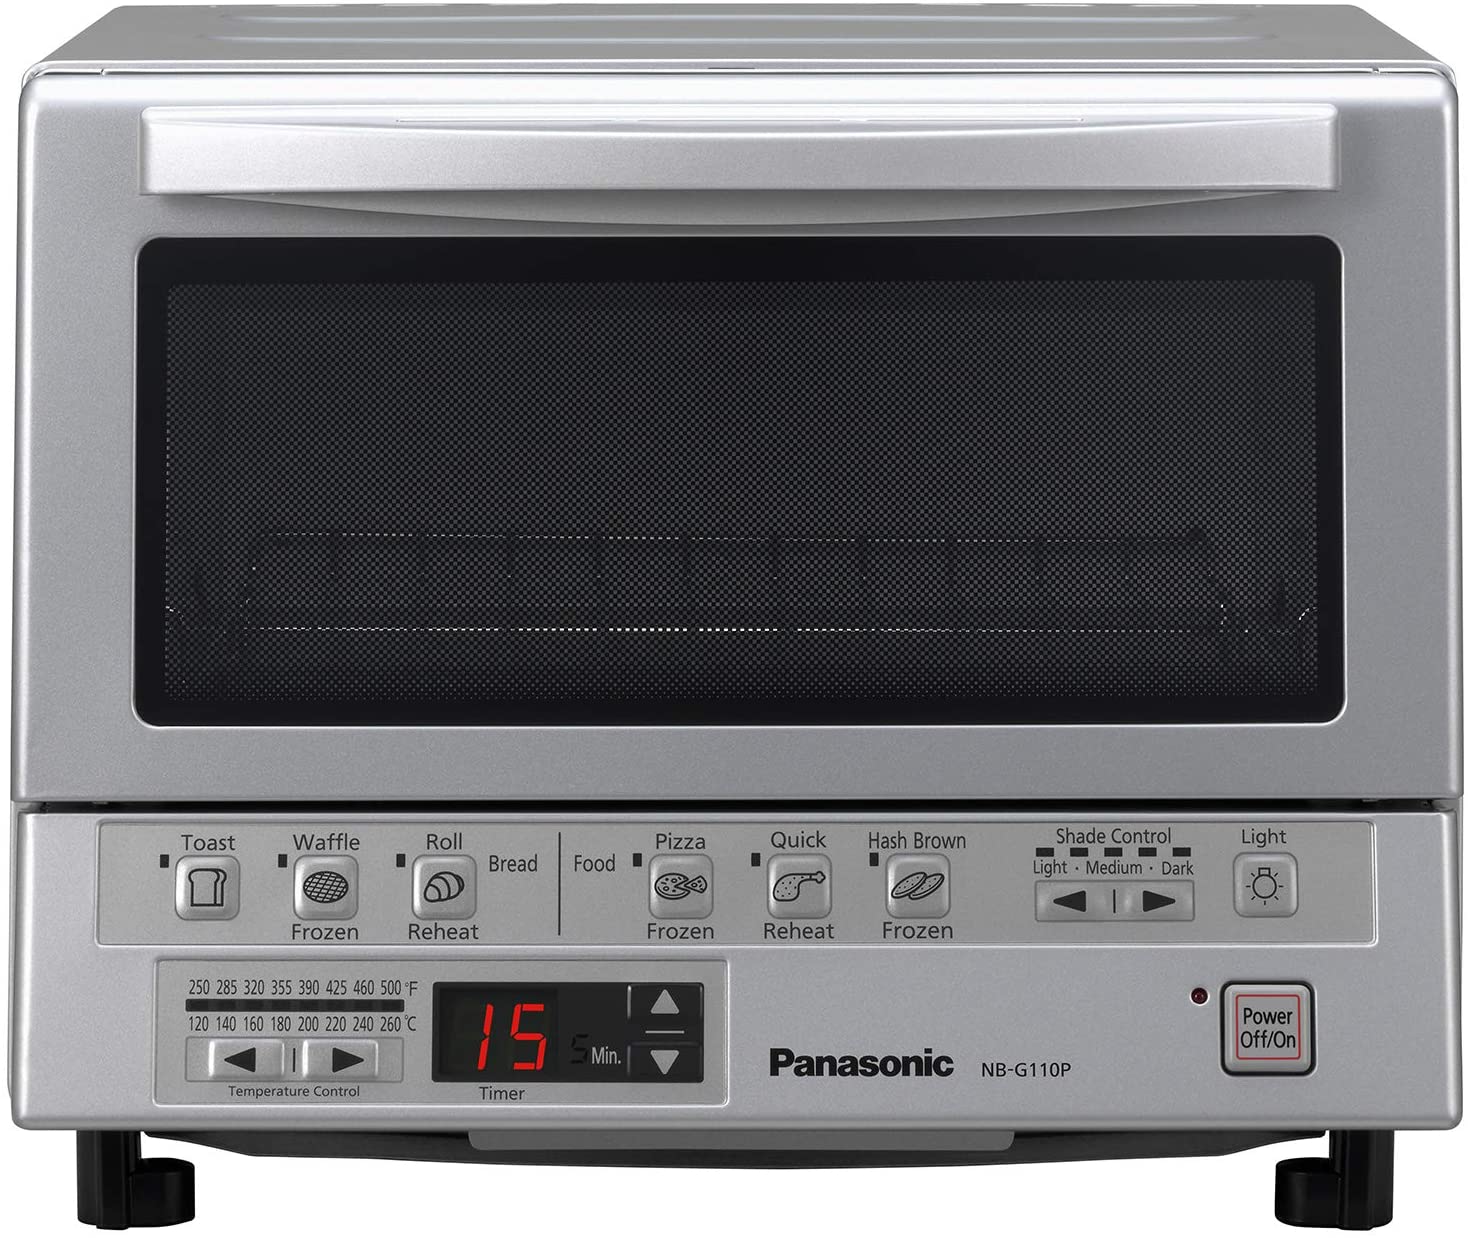 Panasonic NB-G110P FlashXpress Stainless Steel Compact Countertop Toaster Oven